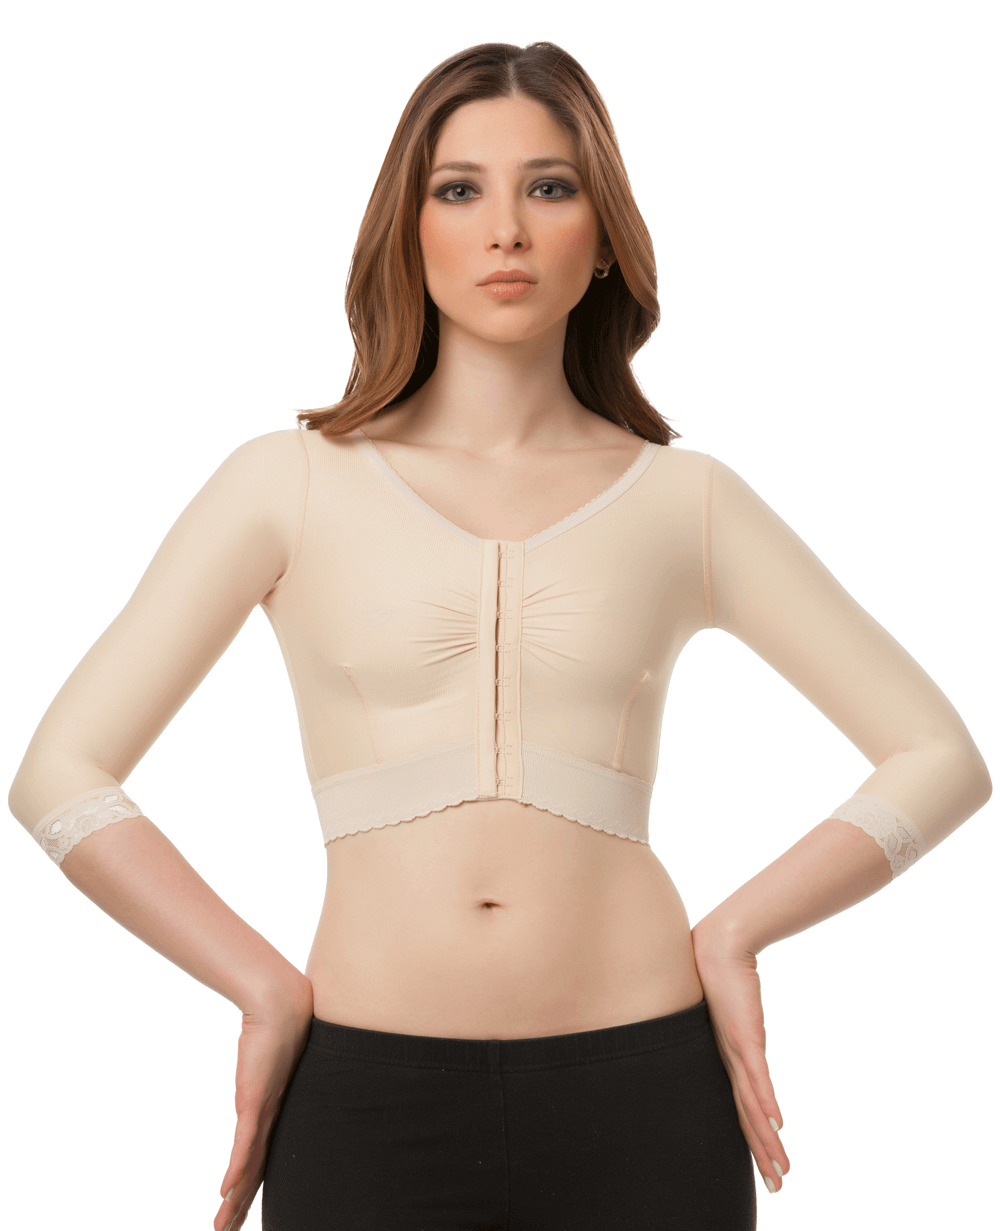 Isavela Womens Closed Buttocks Enhancer Girdle Mid Thigh Length XS Beige at   Women's Clothing store